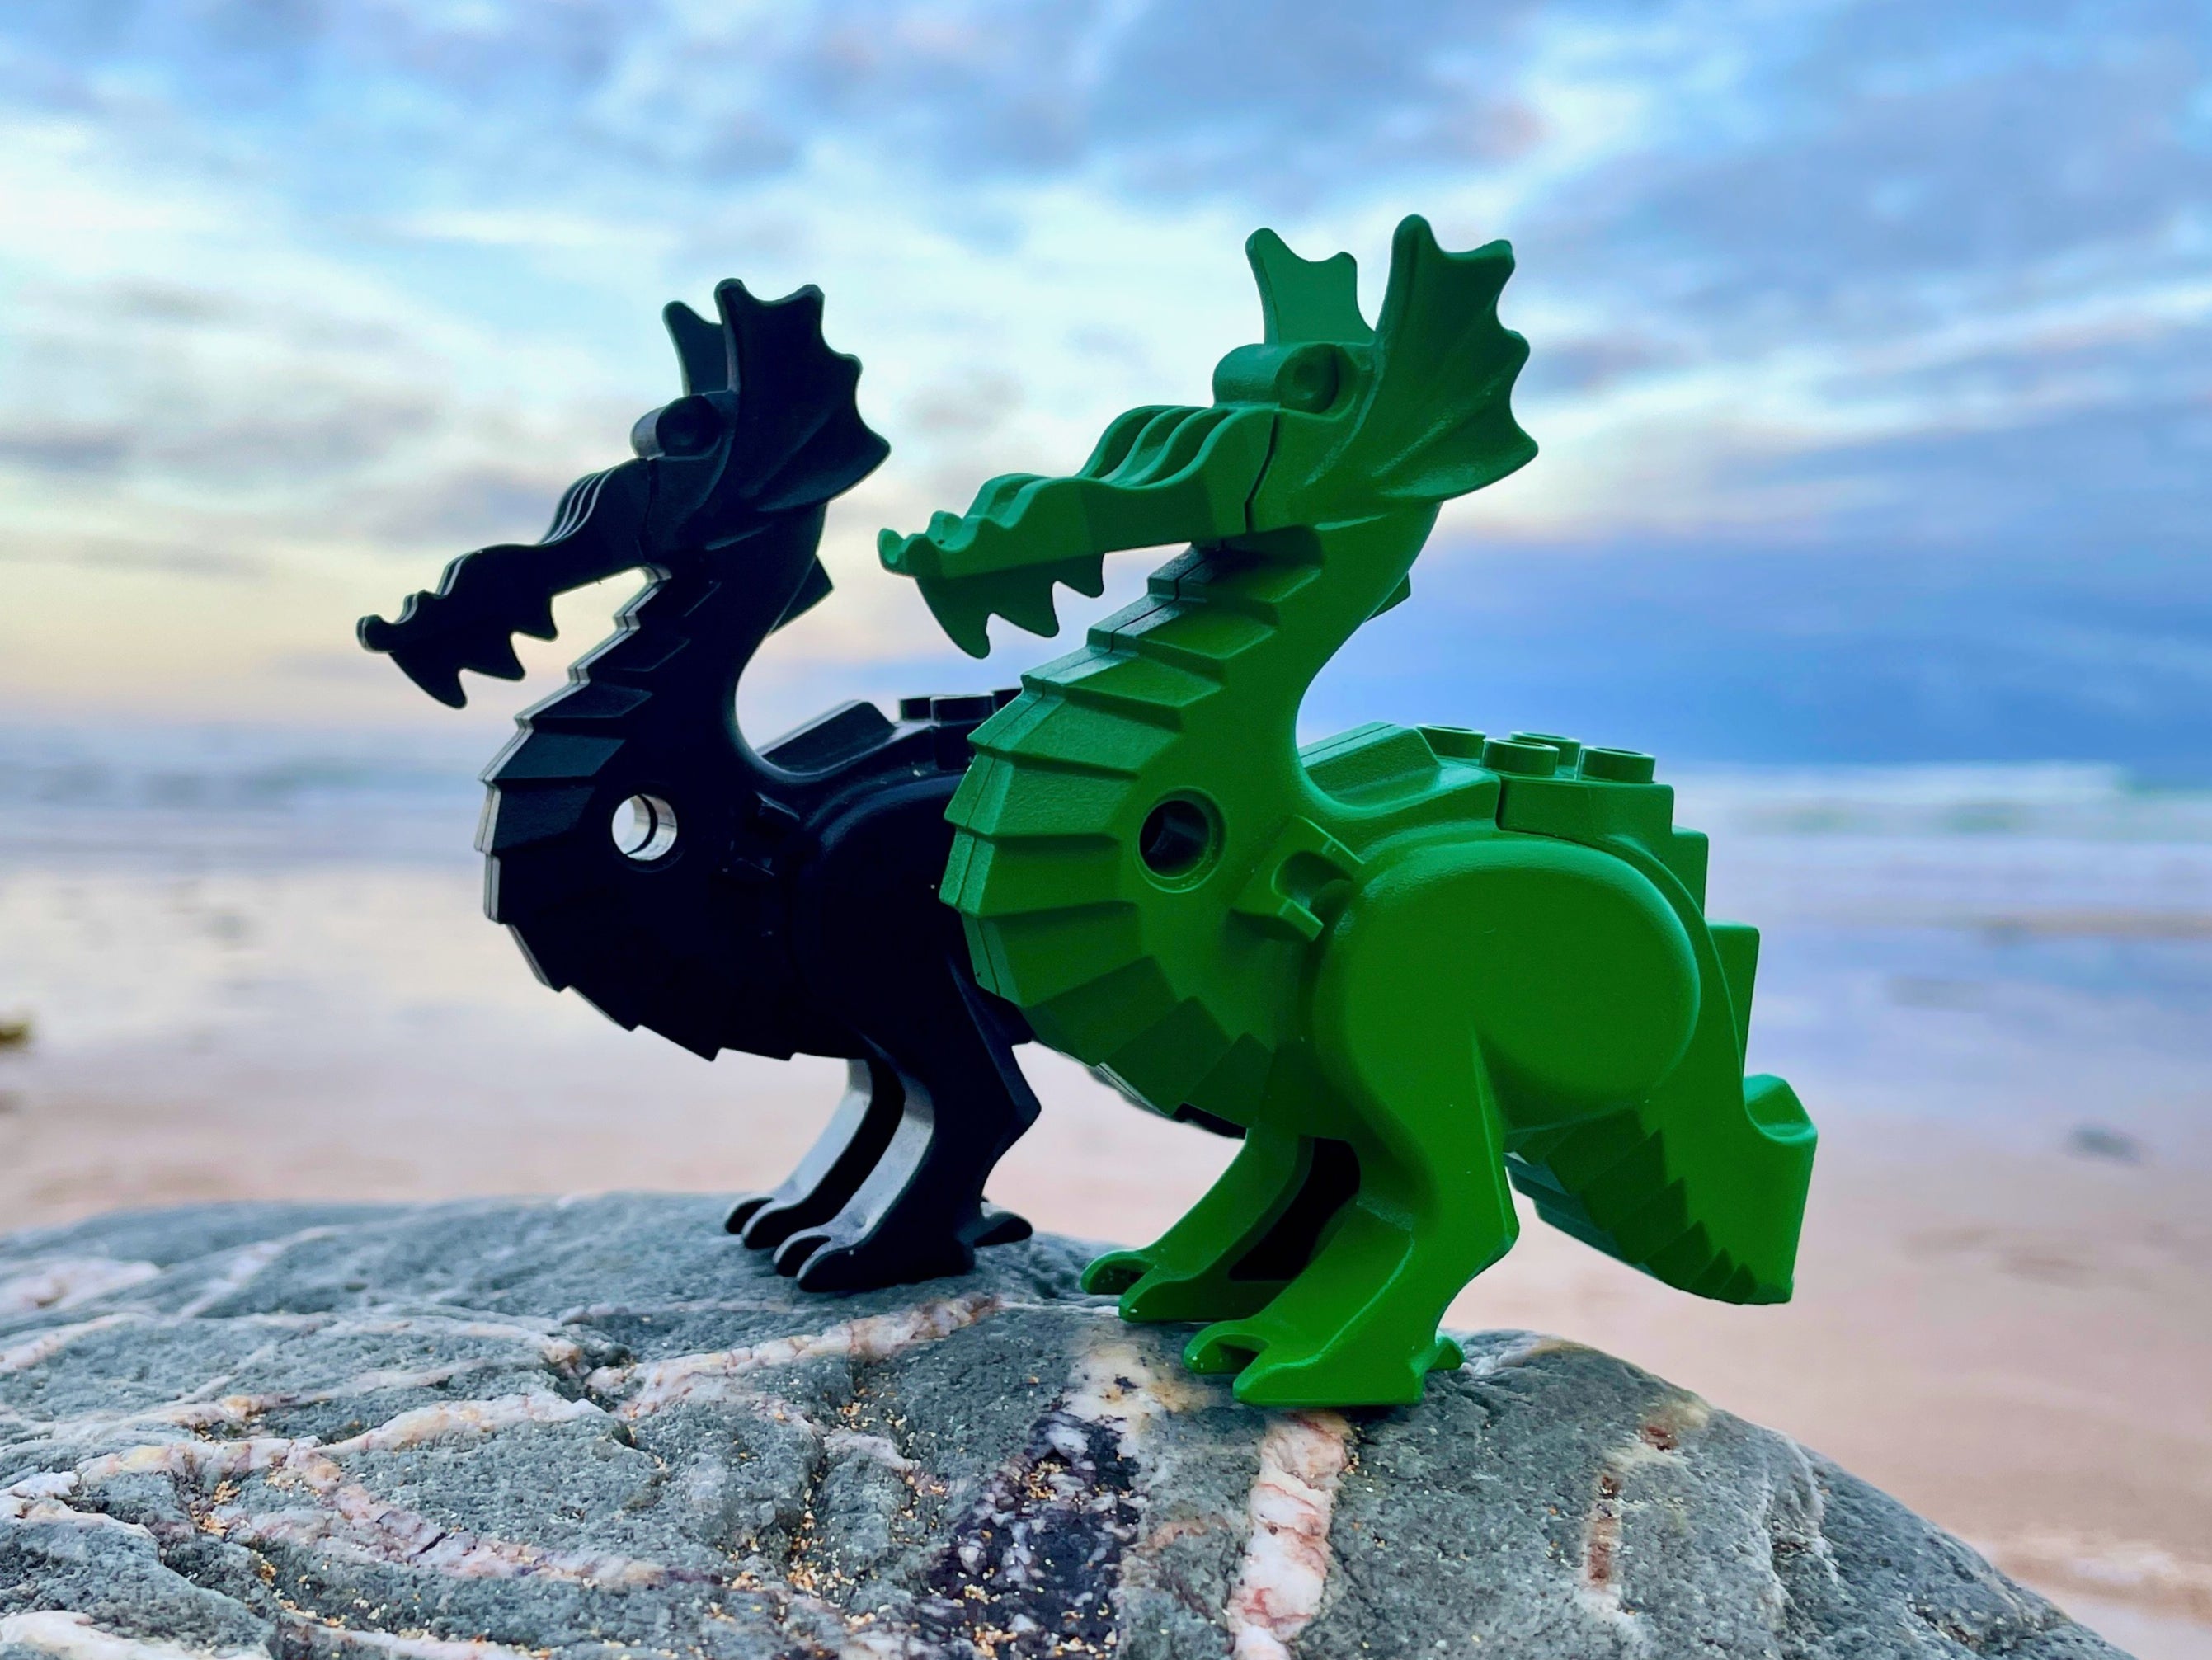 A black dragon and a rare green one, missing their arms, wings and tails